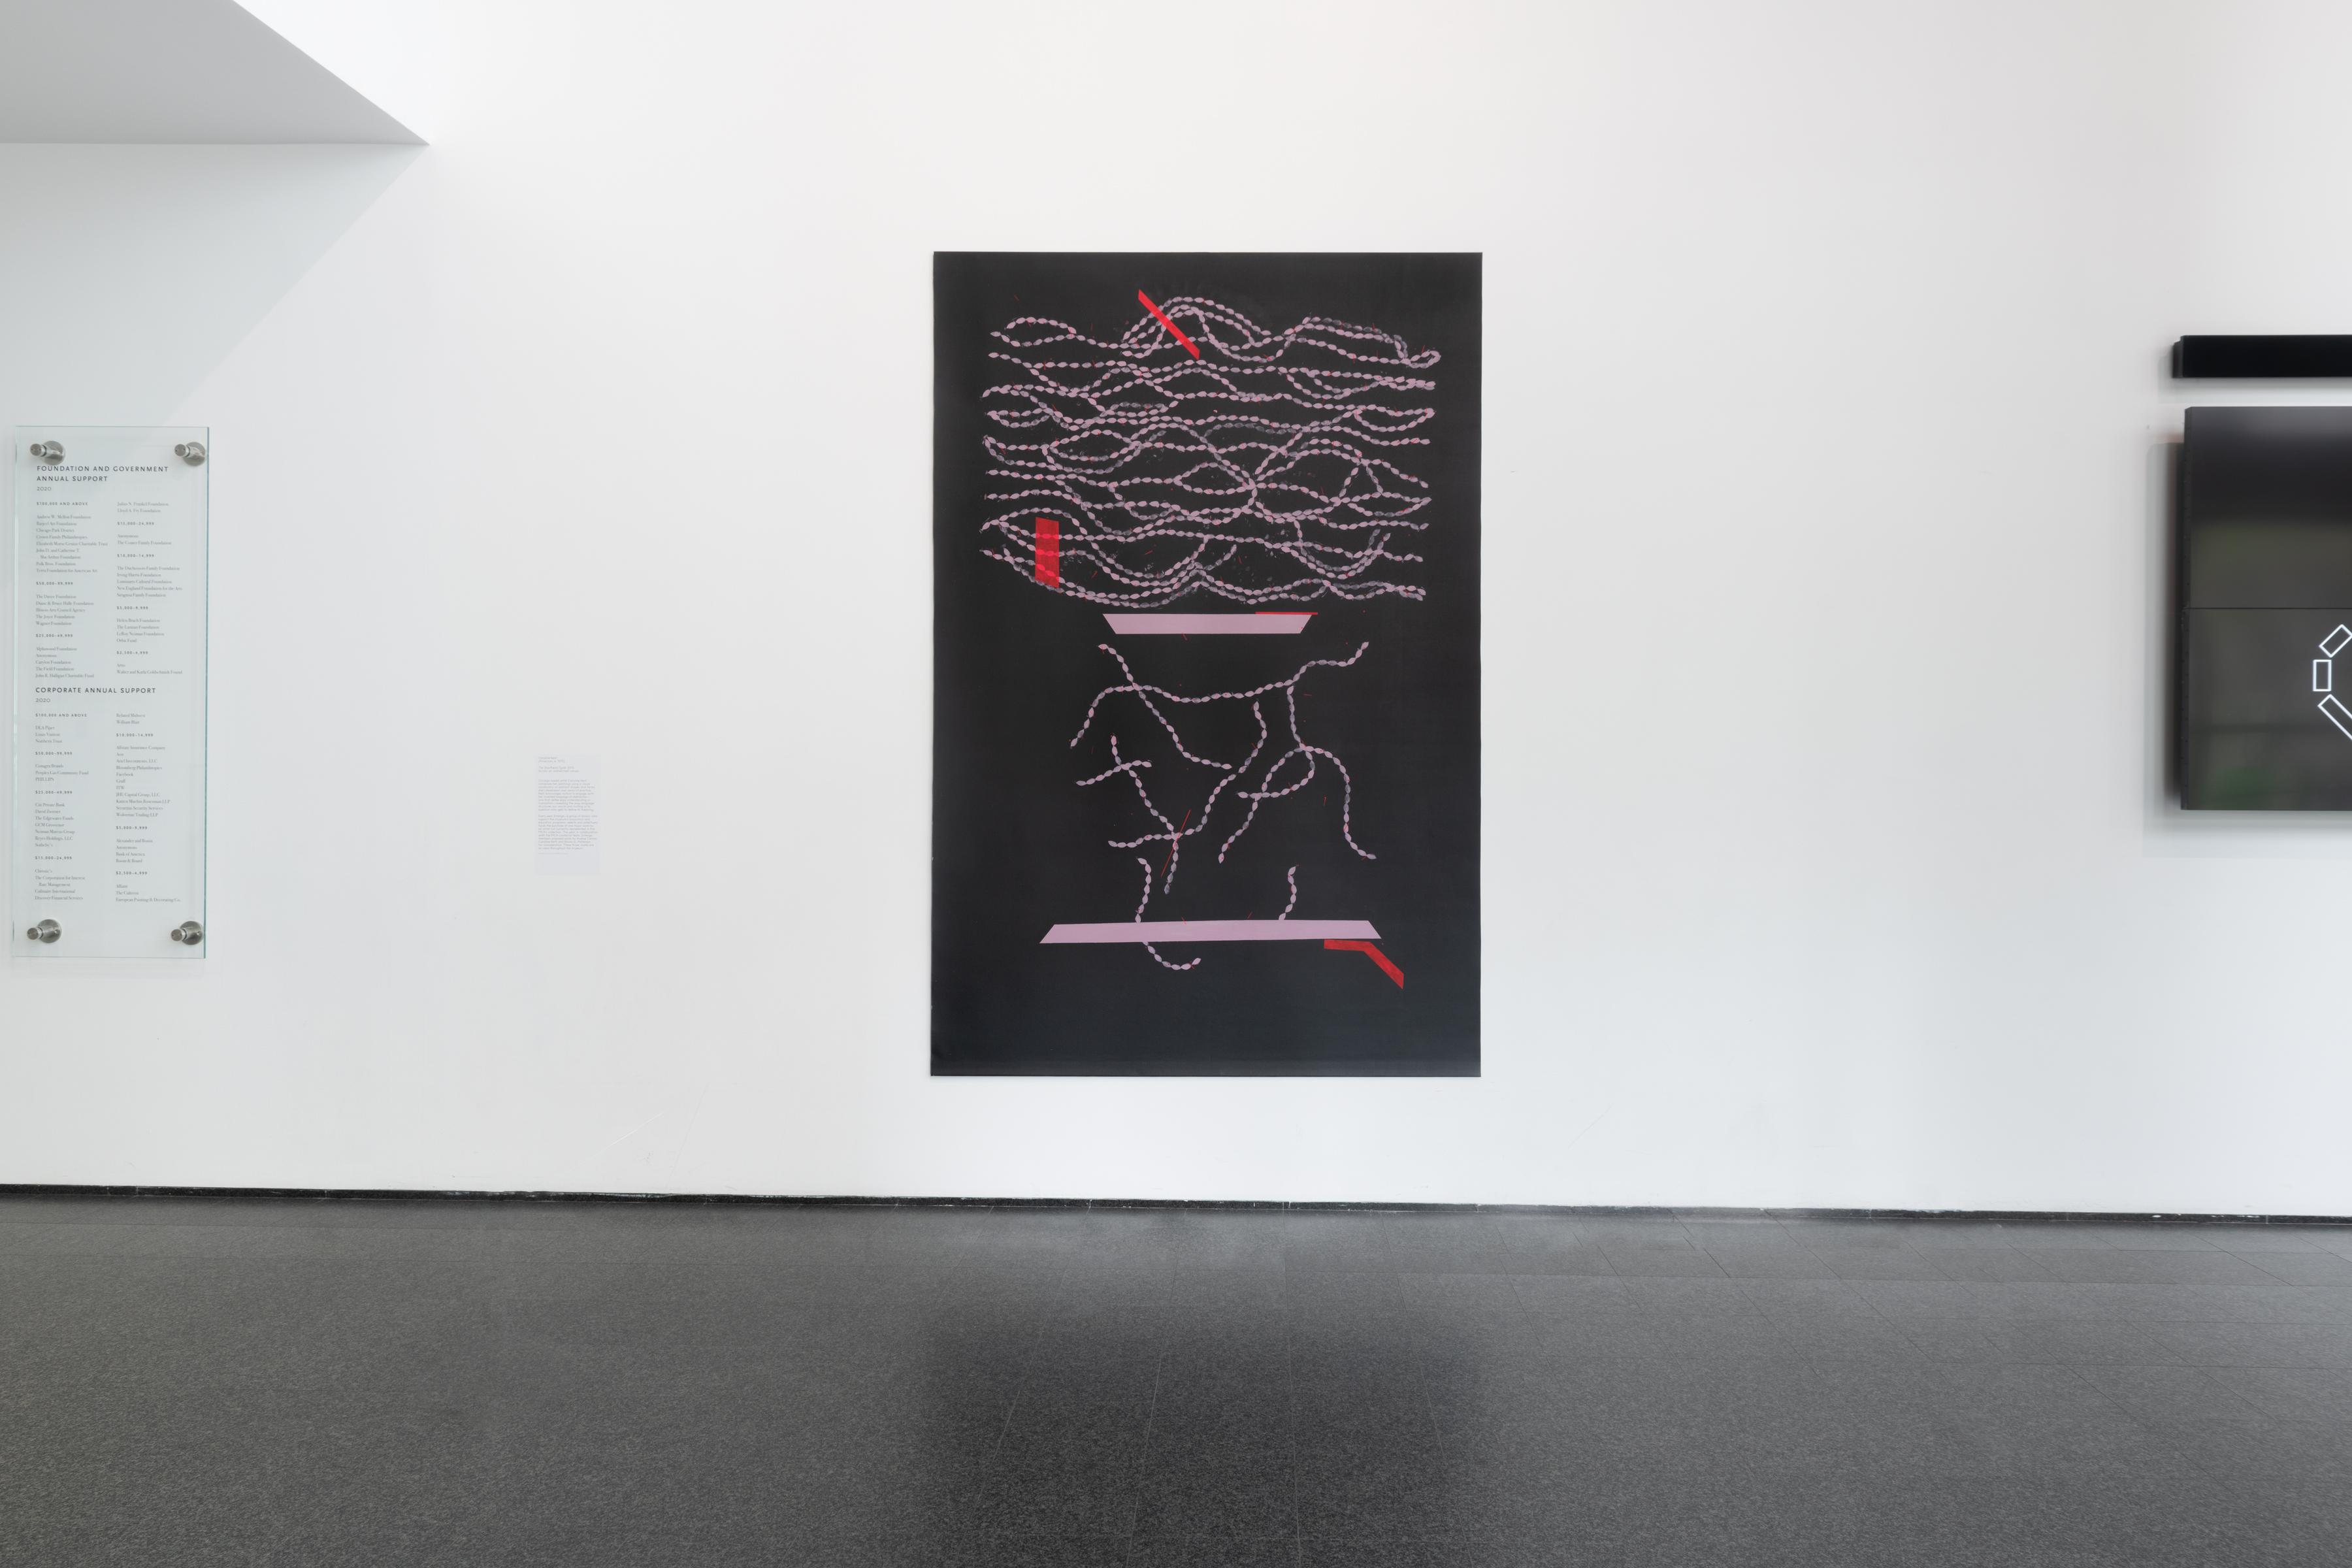 An artwork featuring white, seemingly abstract lines and accents of thick red and pink lines against a black background hangs on a white wall between a clear placard and an unidentifiable object.